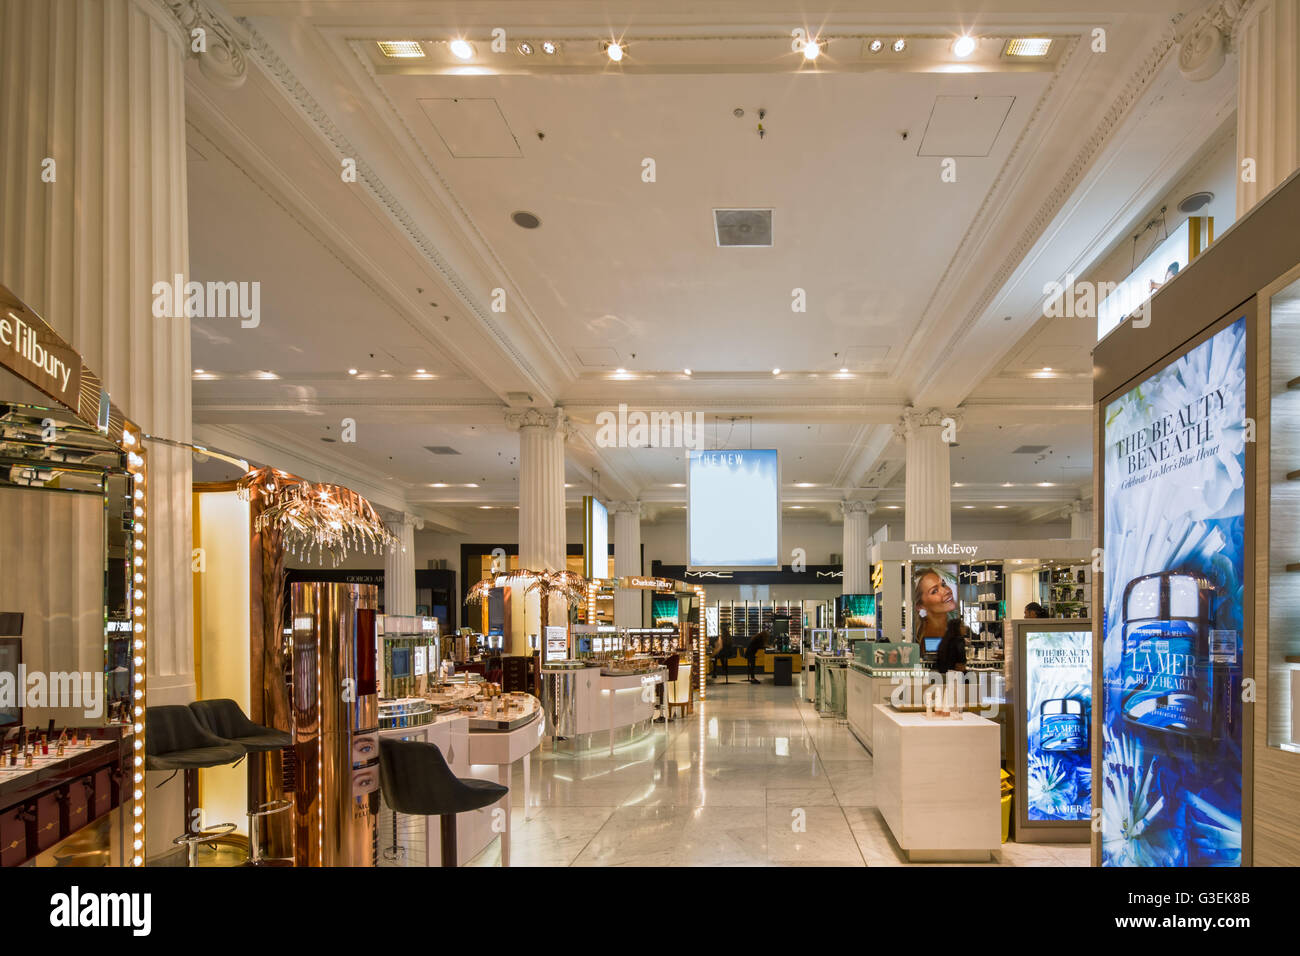 Selfridges Department Store Interior, Louis Vuitton Shop Stock Photo,  Picture and Royalty Free Image. Image 51774388.